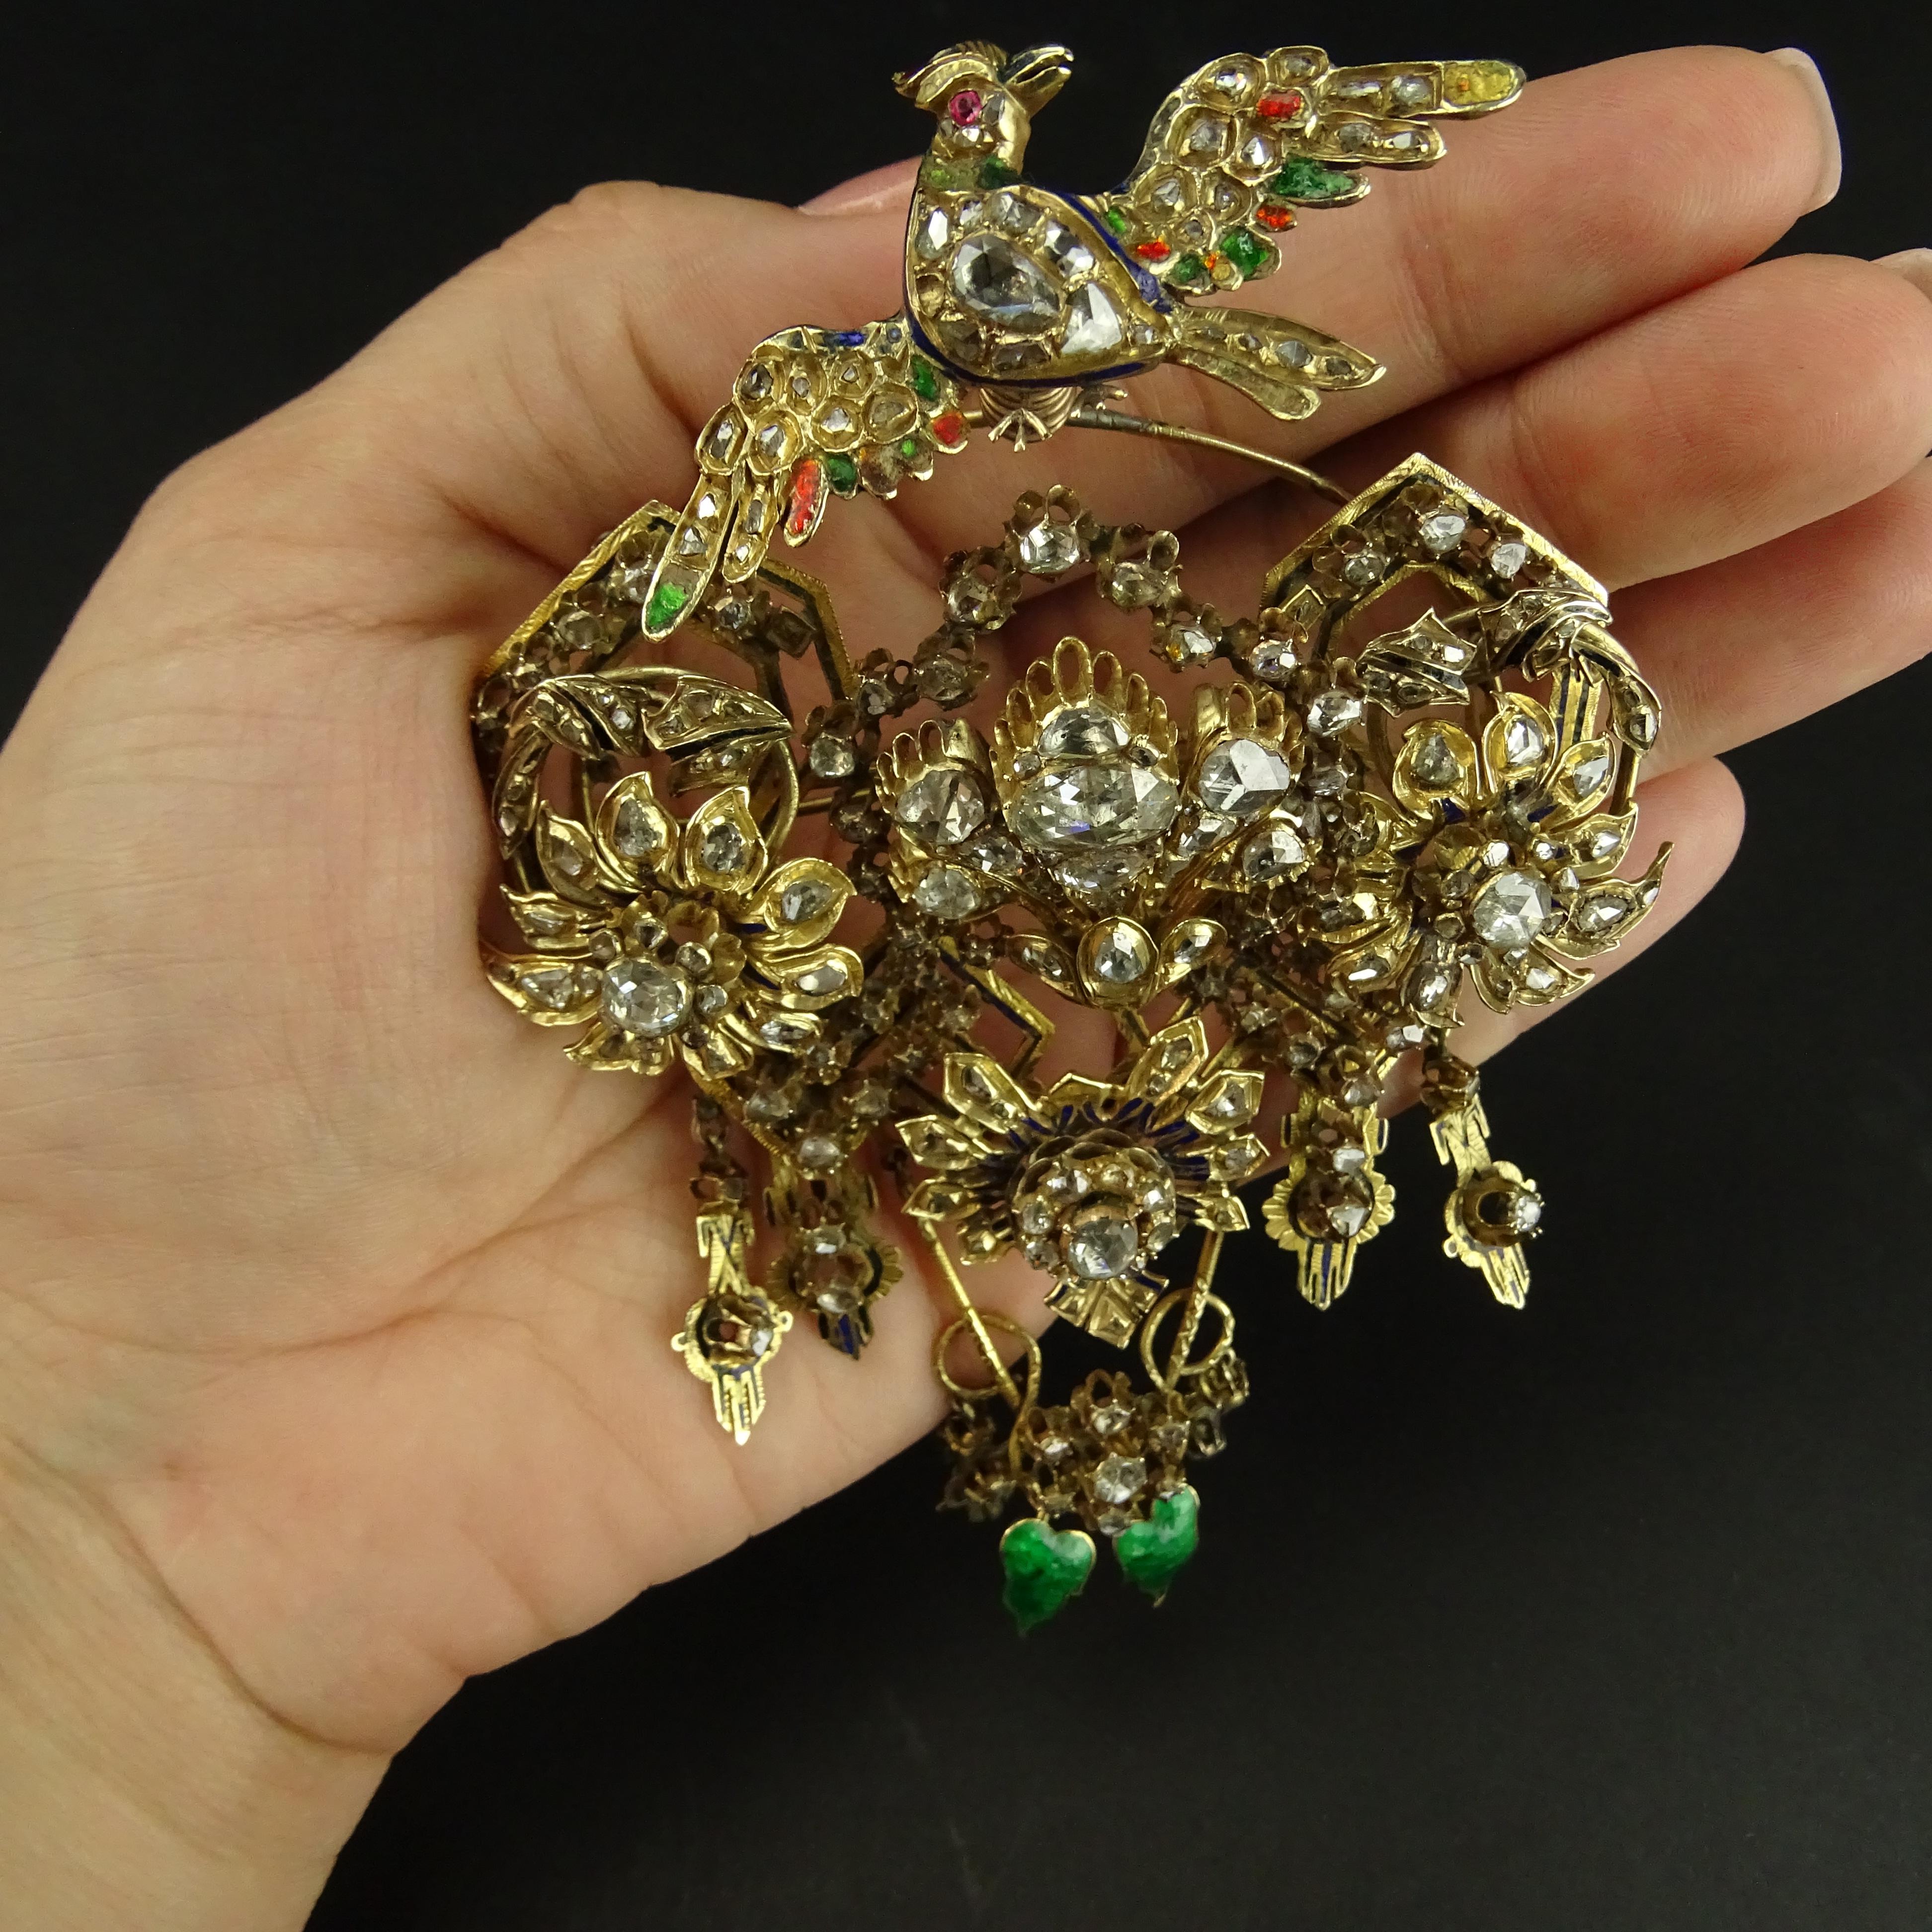 Museum Quality Large 19th Century Turkey Late Ottoman Rose Cut and Old Mine Cut Diamond, Enamel, Yellow Gold and Silver Articulated Bird Brooch.